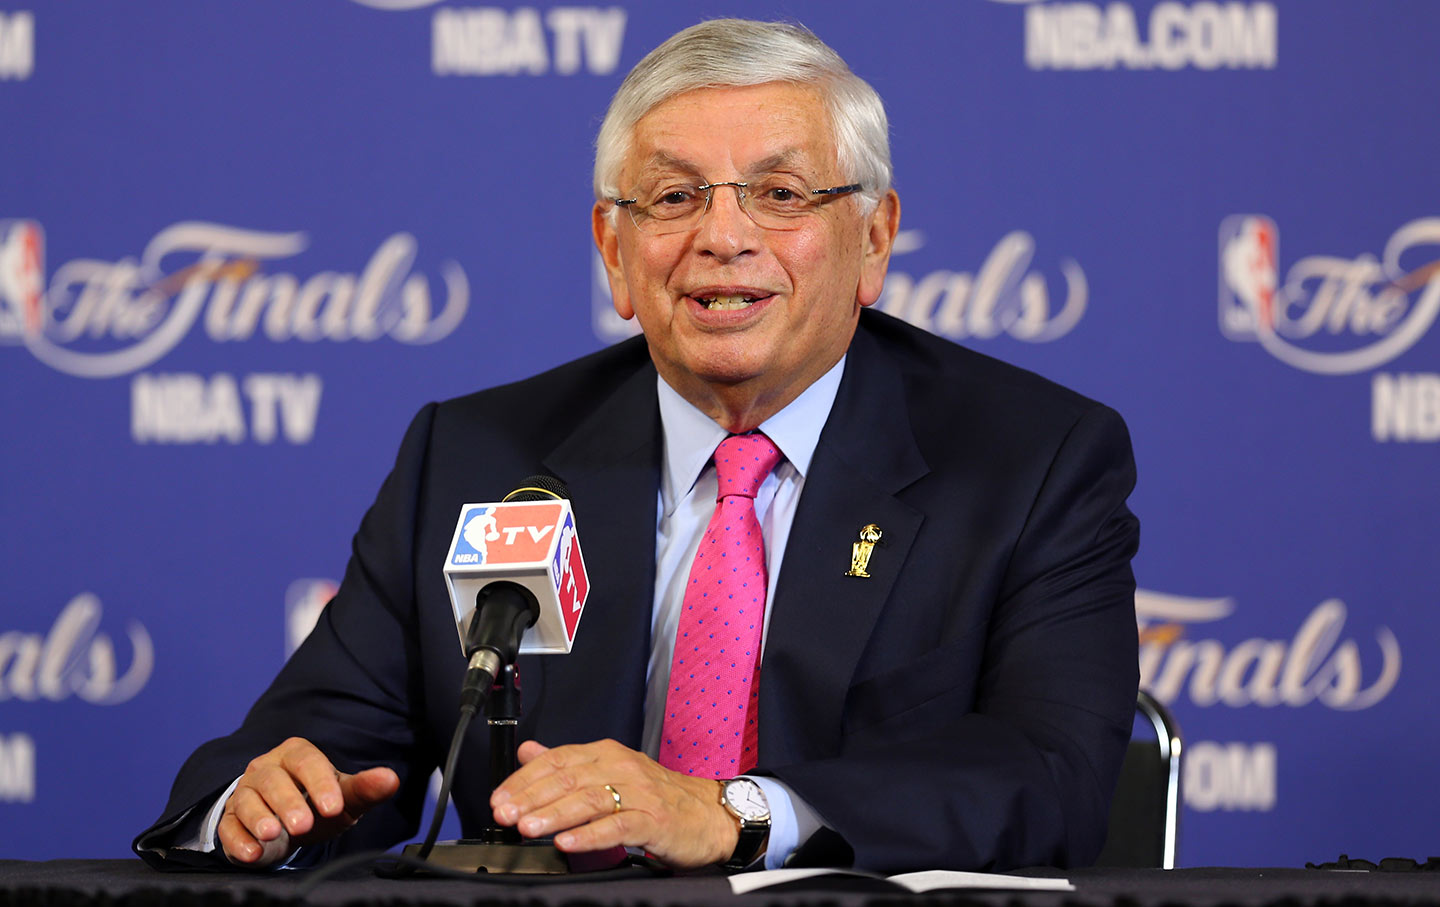 David Stern, who transformed NBA into a global sports power, dies at age 77